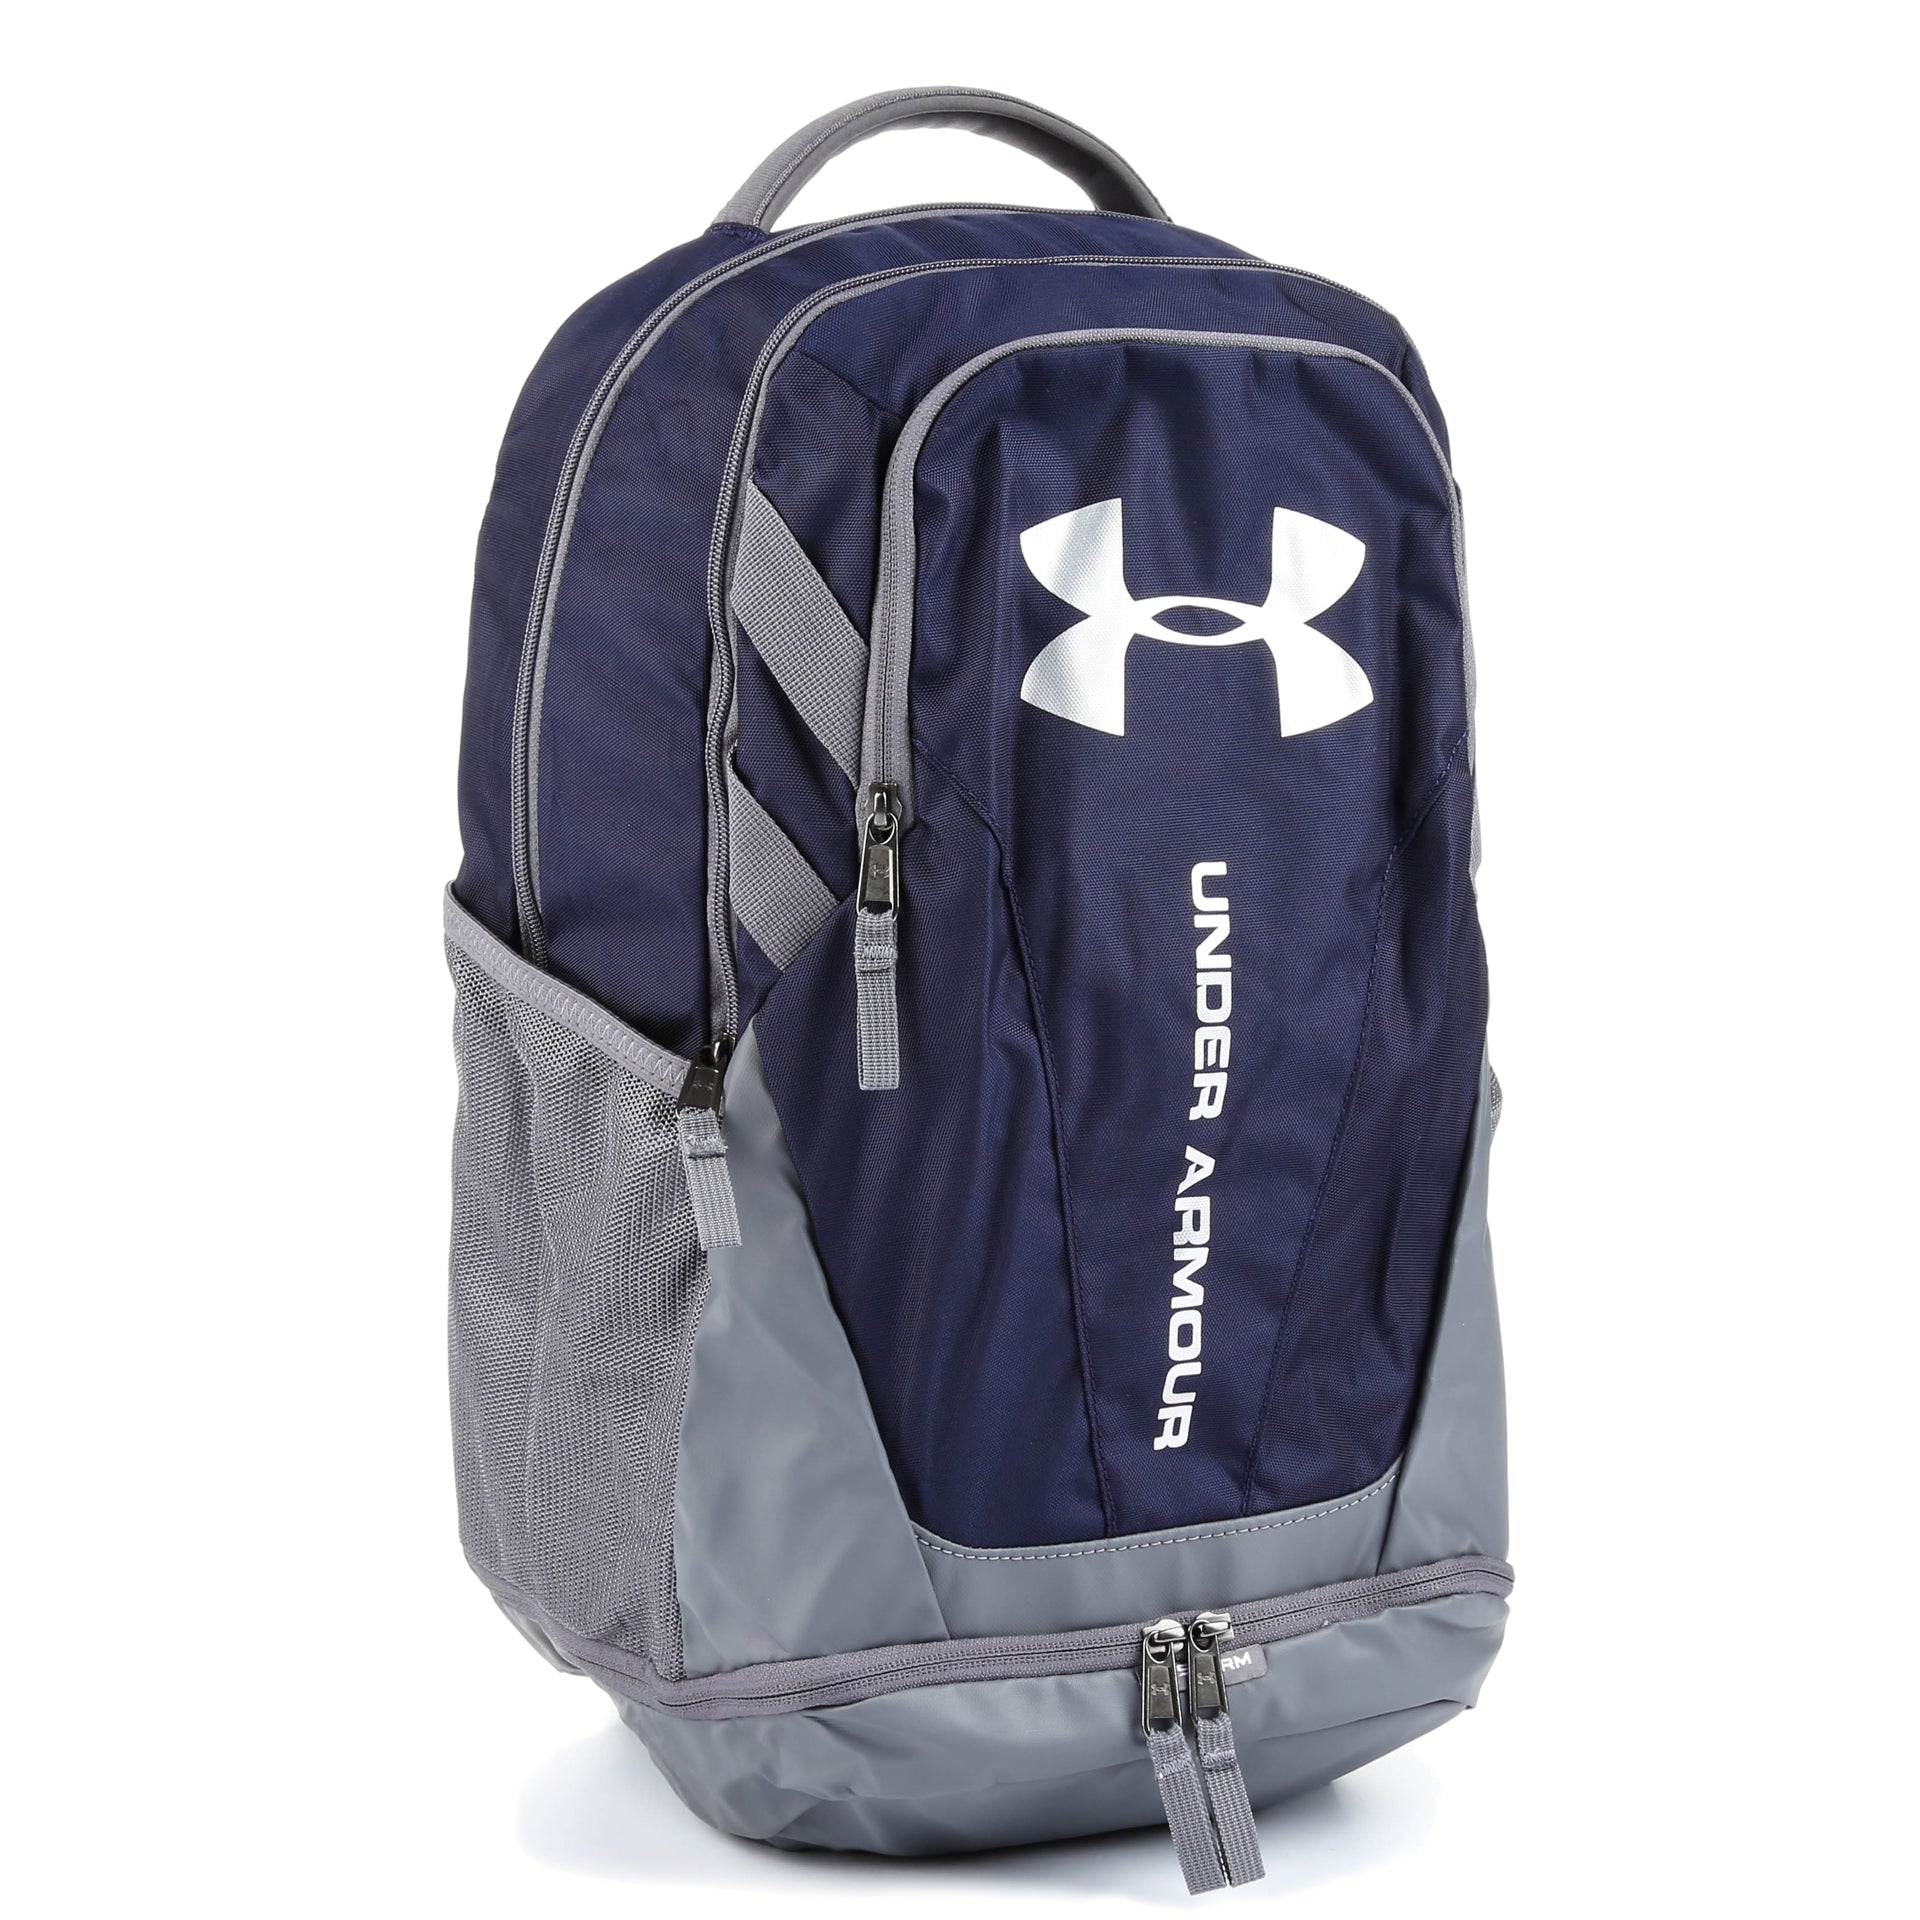 Under Armour Hustle 3.0 Backpack - Midnight Navy / Graphite New Star